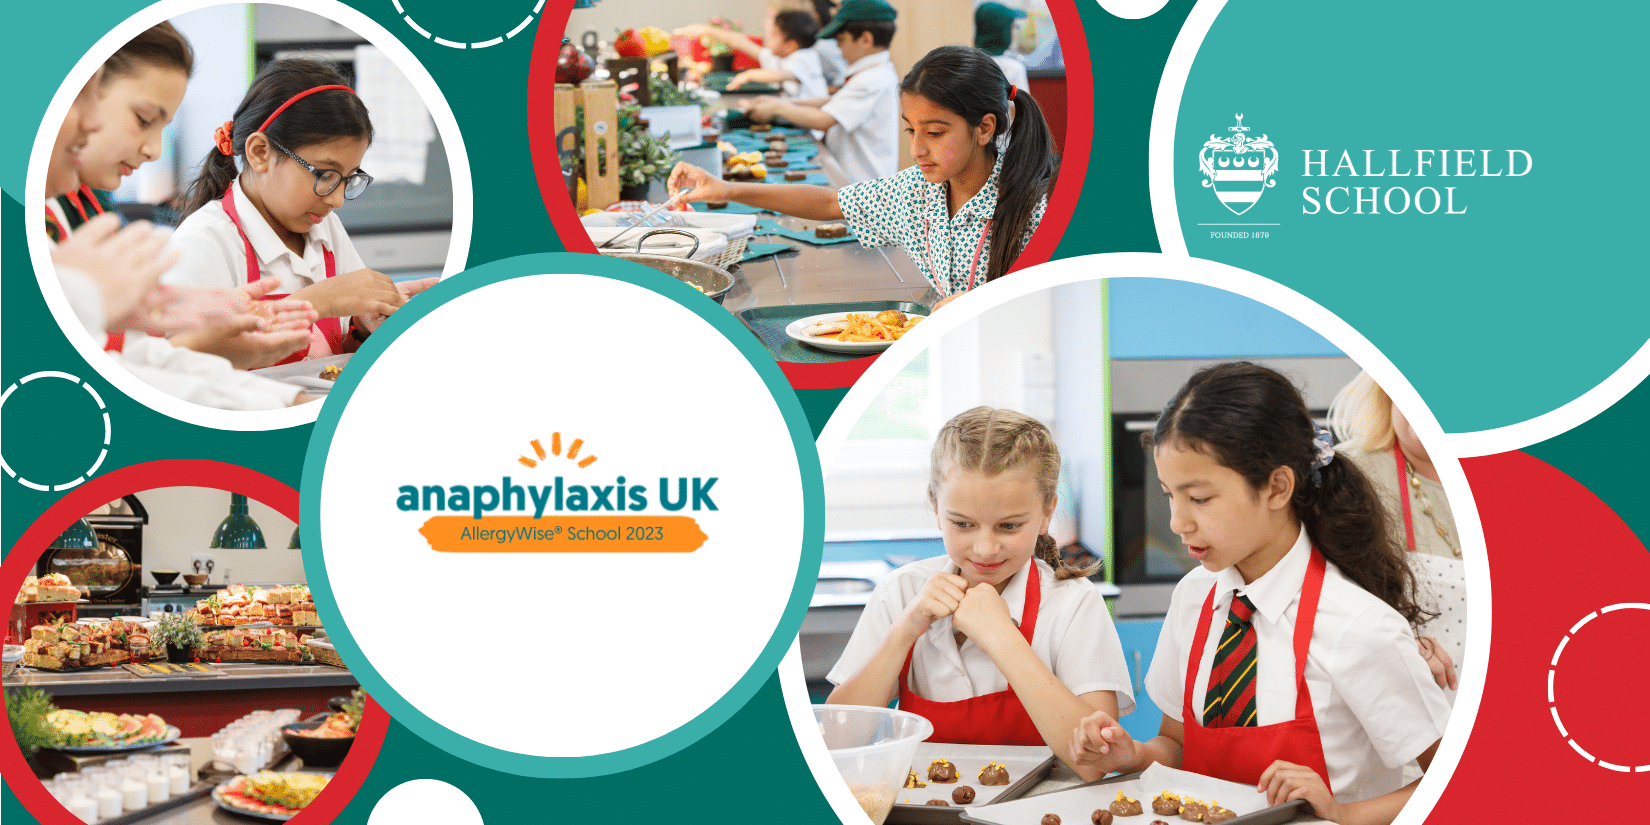 Hallfield given Anaphylaxis UK AllergyWise School 2023 award